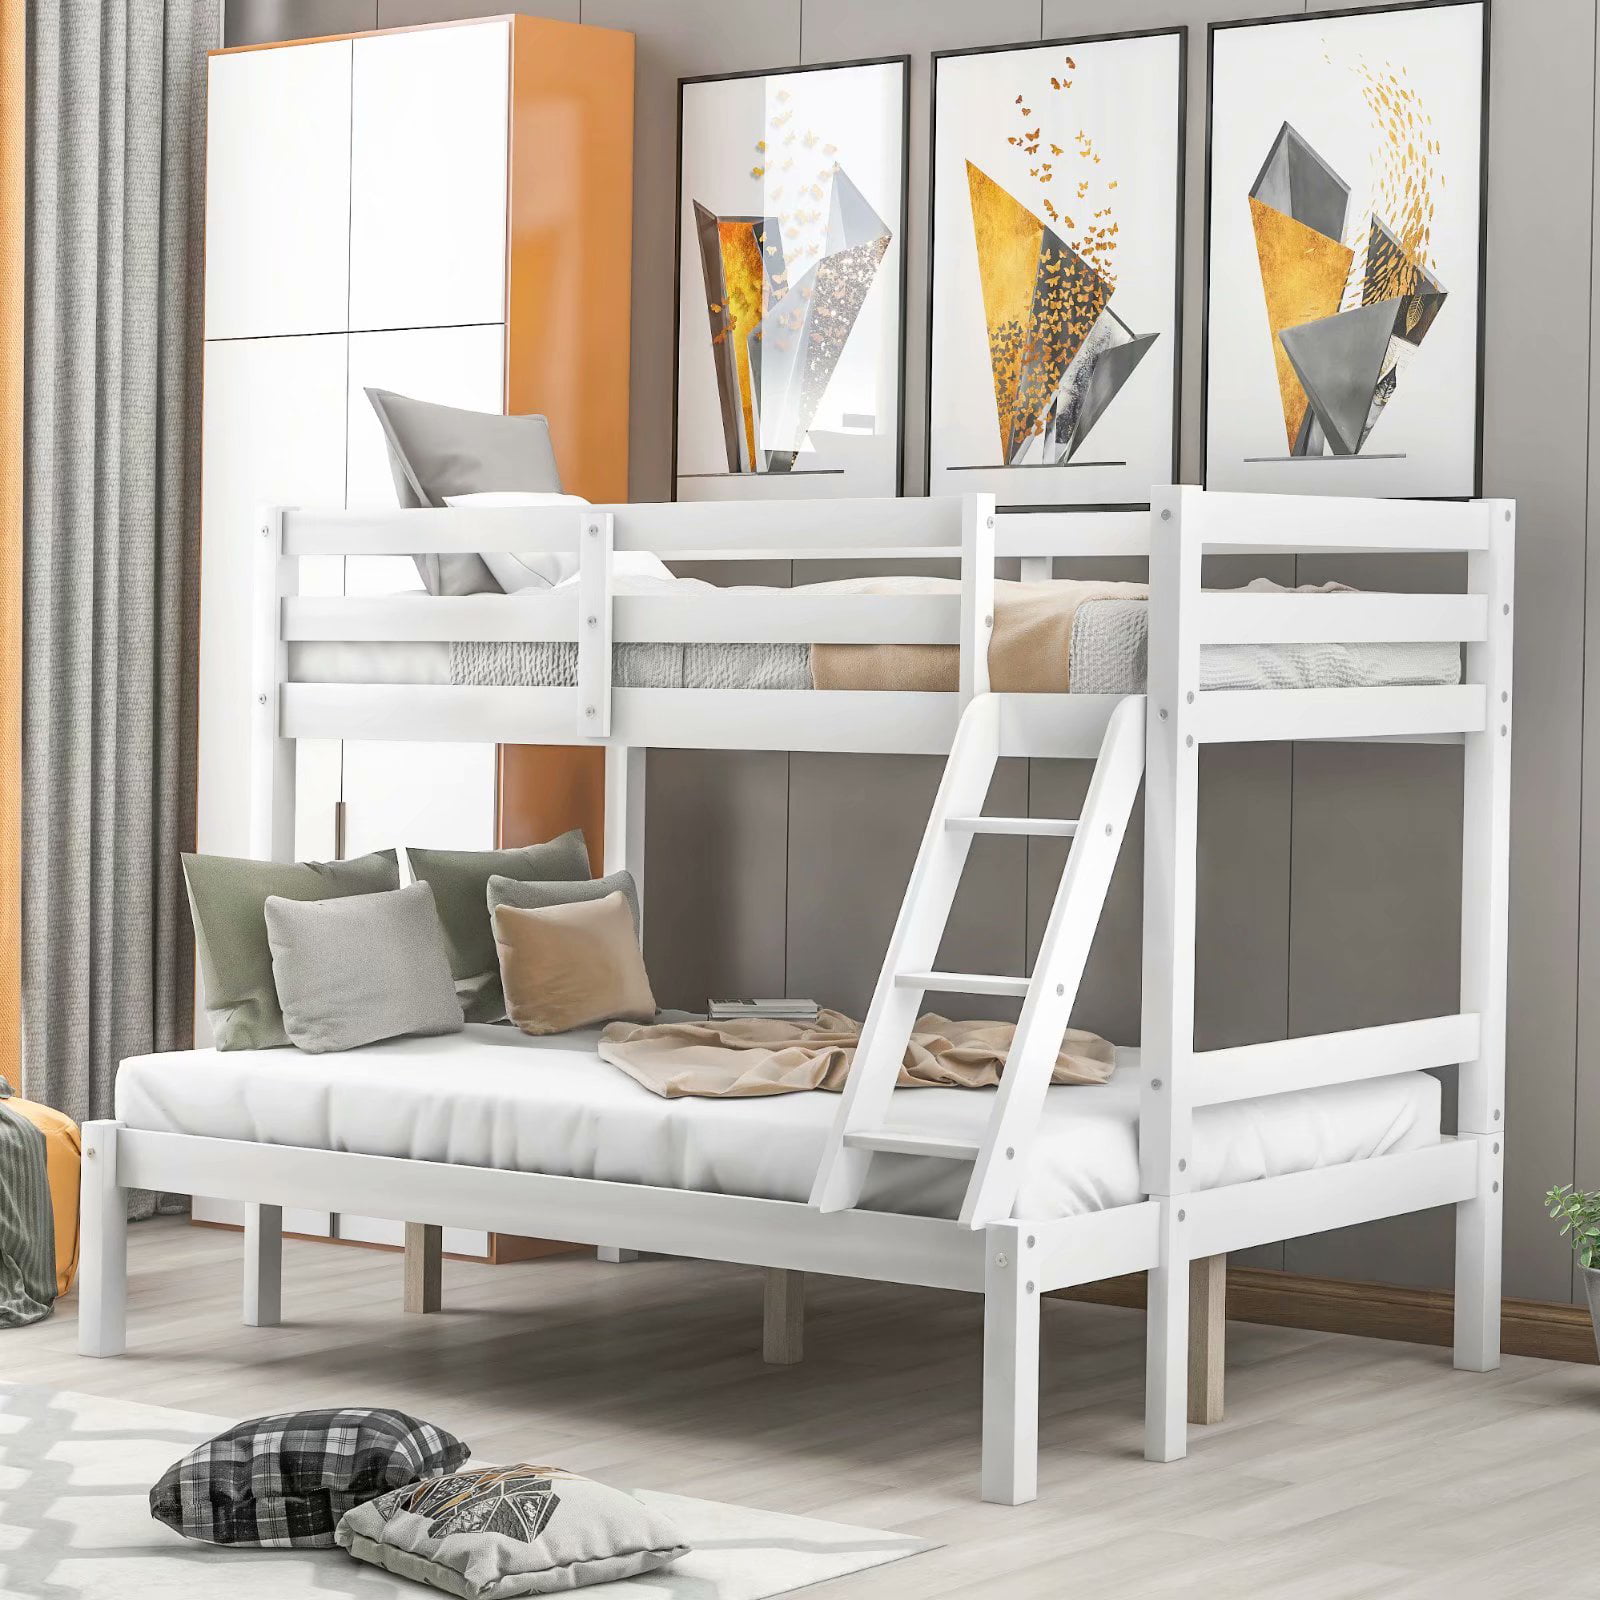 EVERKING Twin Over Full Wood Bunk Bed Frame with Ladder